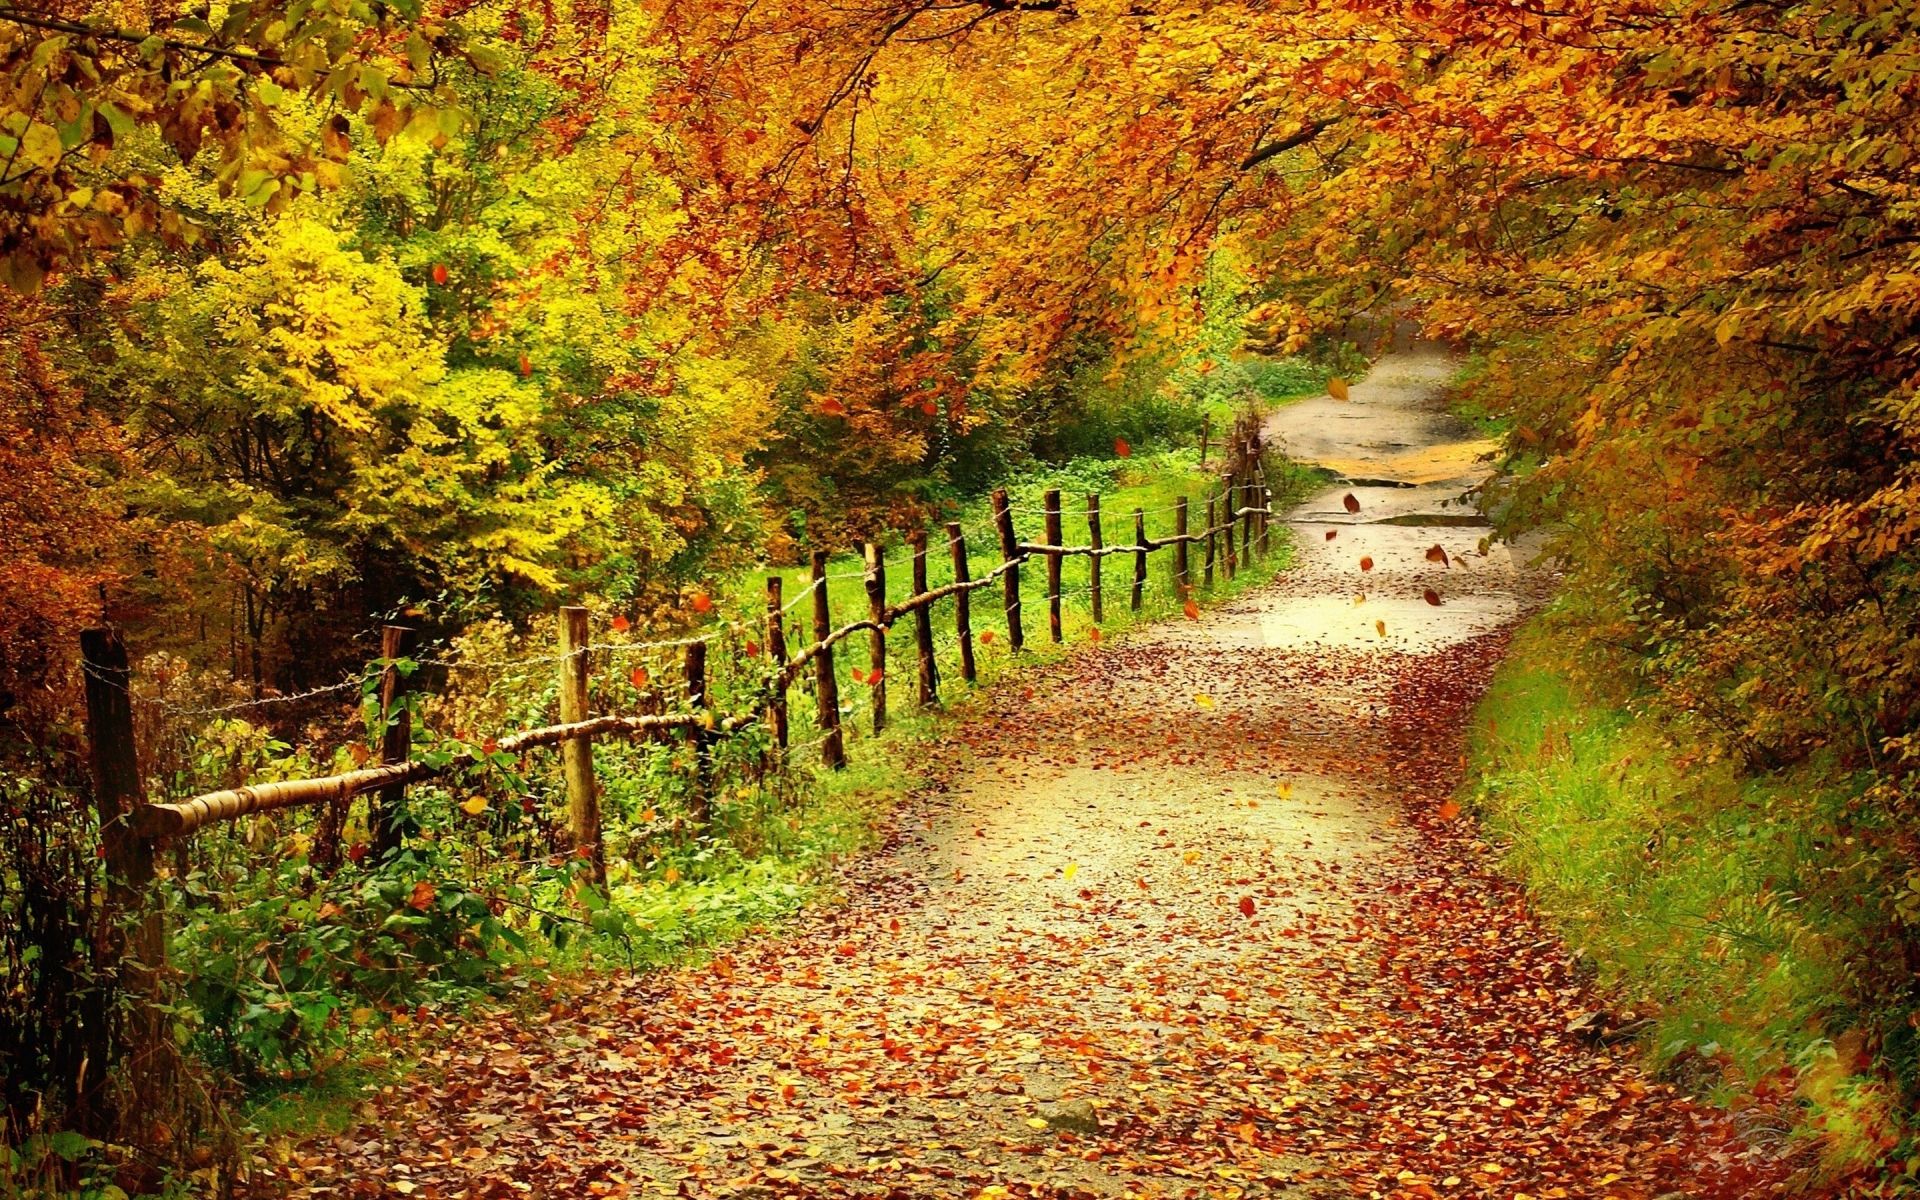 HD wallpaper, Road, Country, Autumn